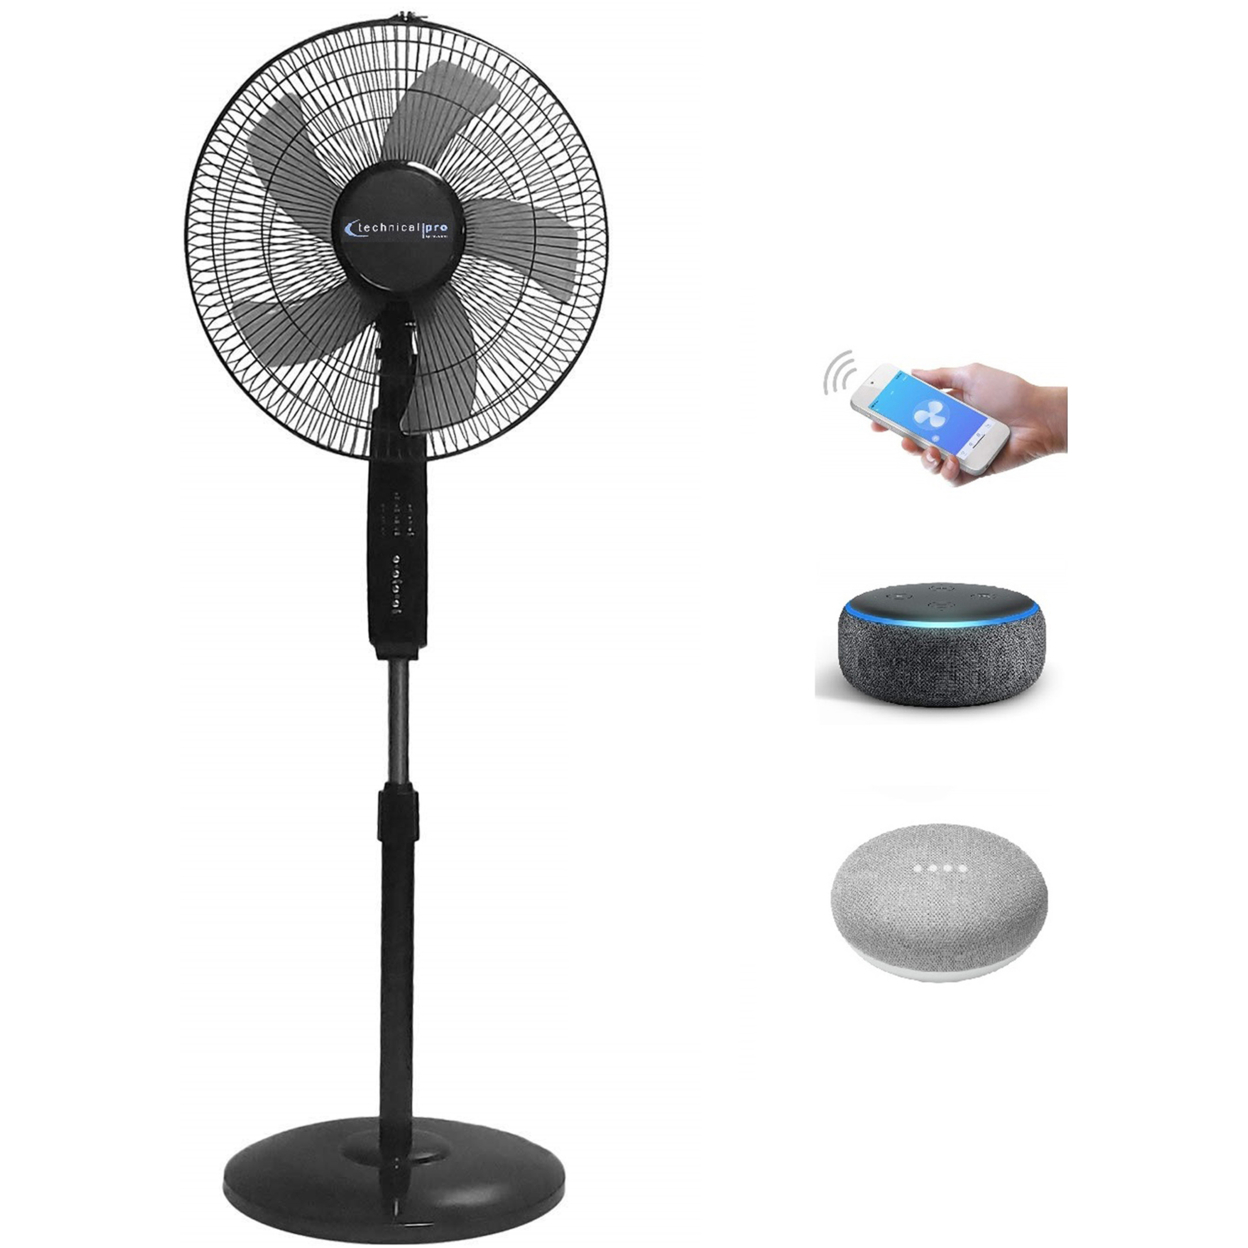 Technical Pro WIFI Enabled 16 Inch Standing Fan With Oscillating Feature, Voice Control And Smart Home App (Black)